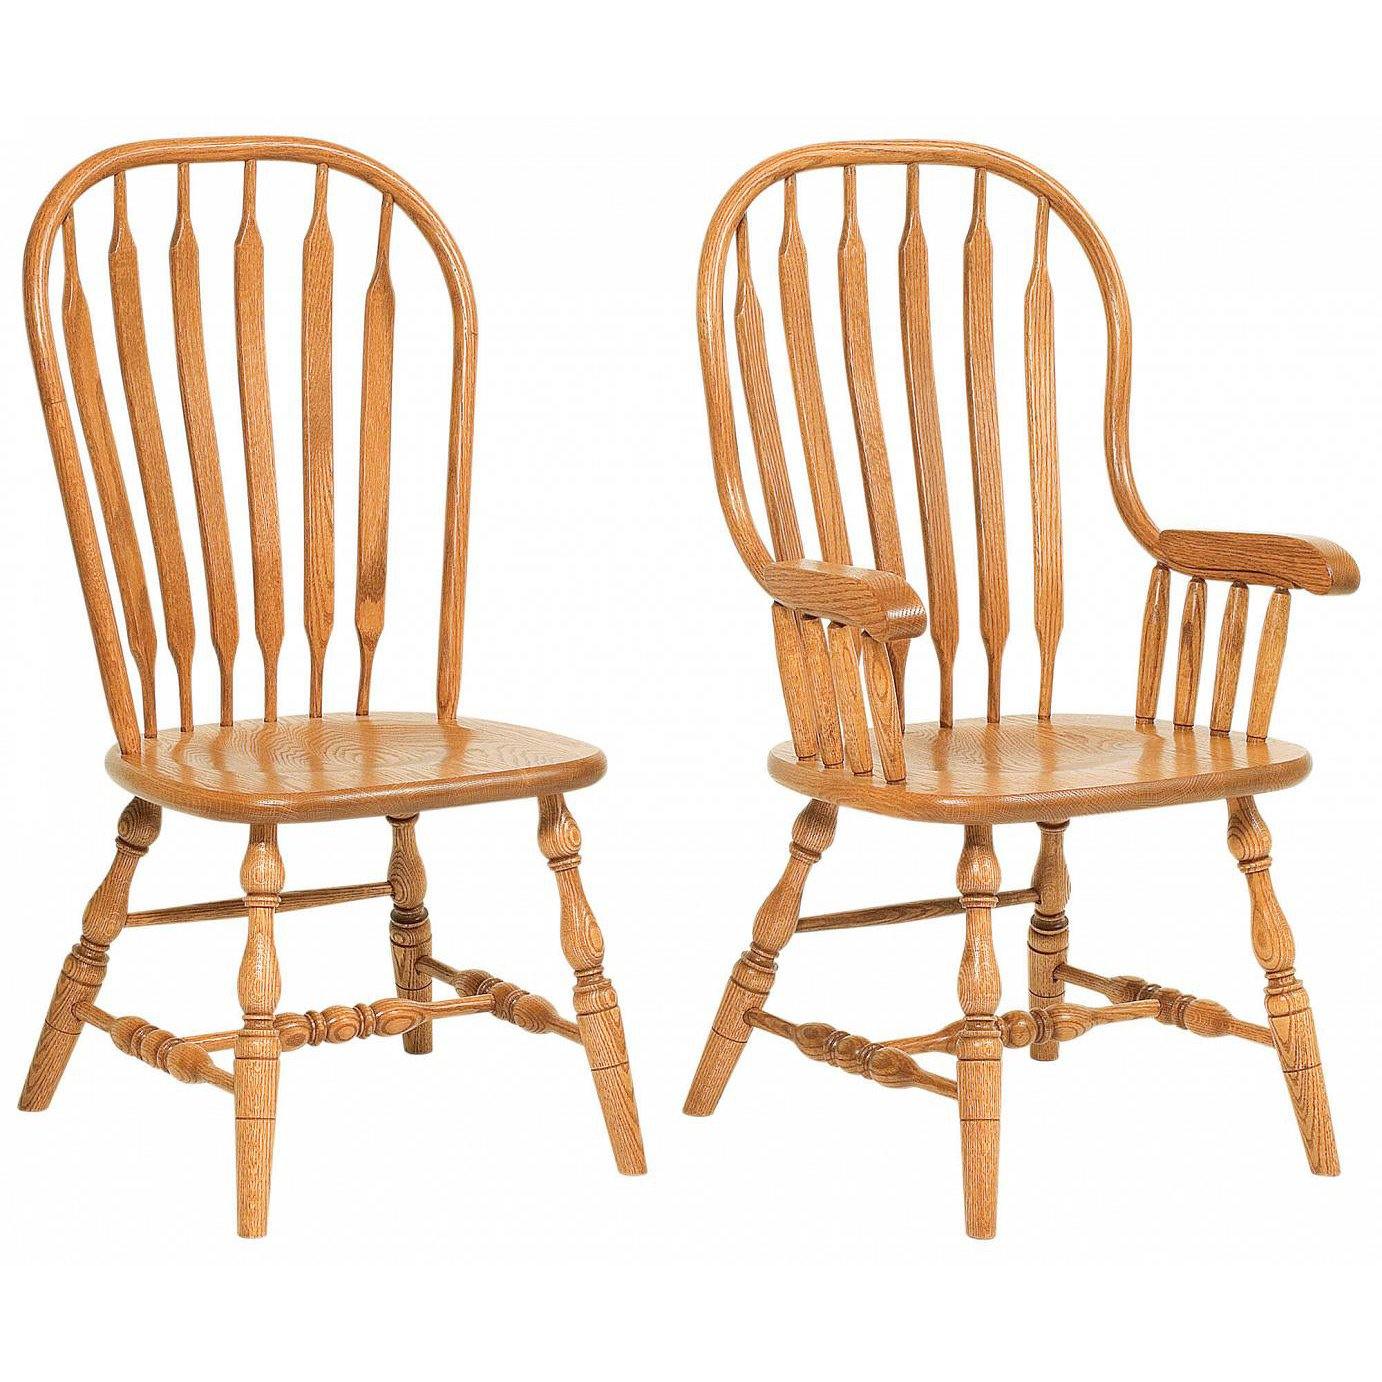 Quality Wooden Chairs for Dining Room Trading in China